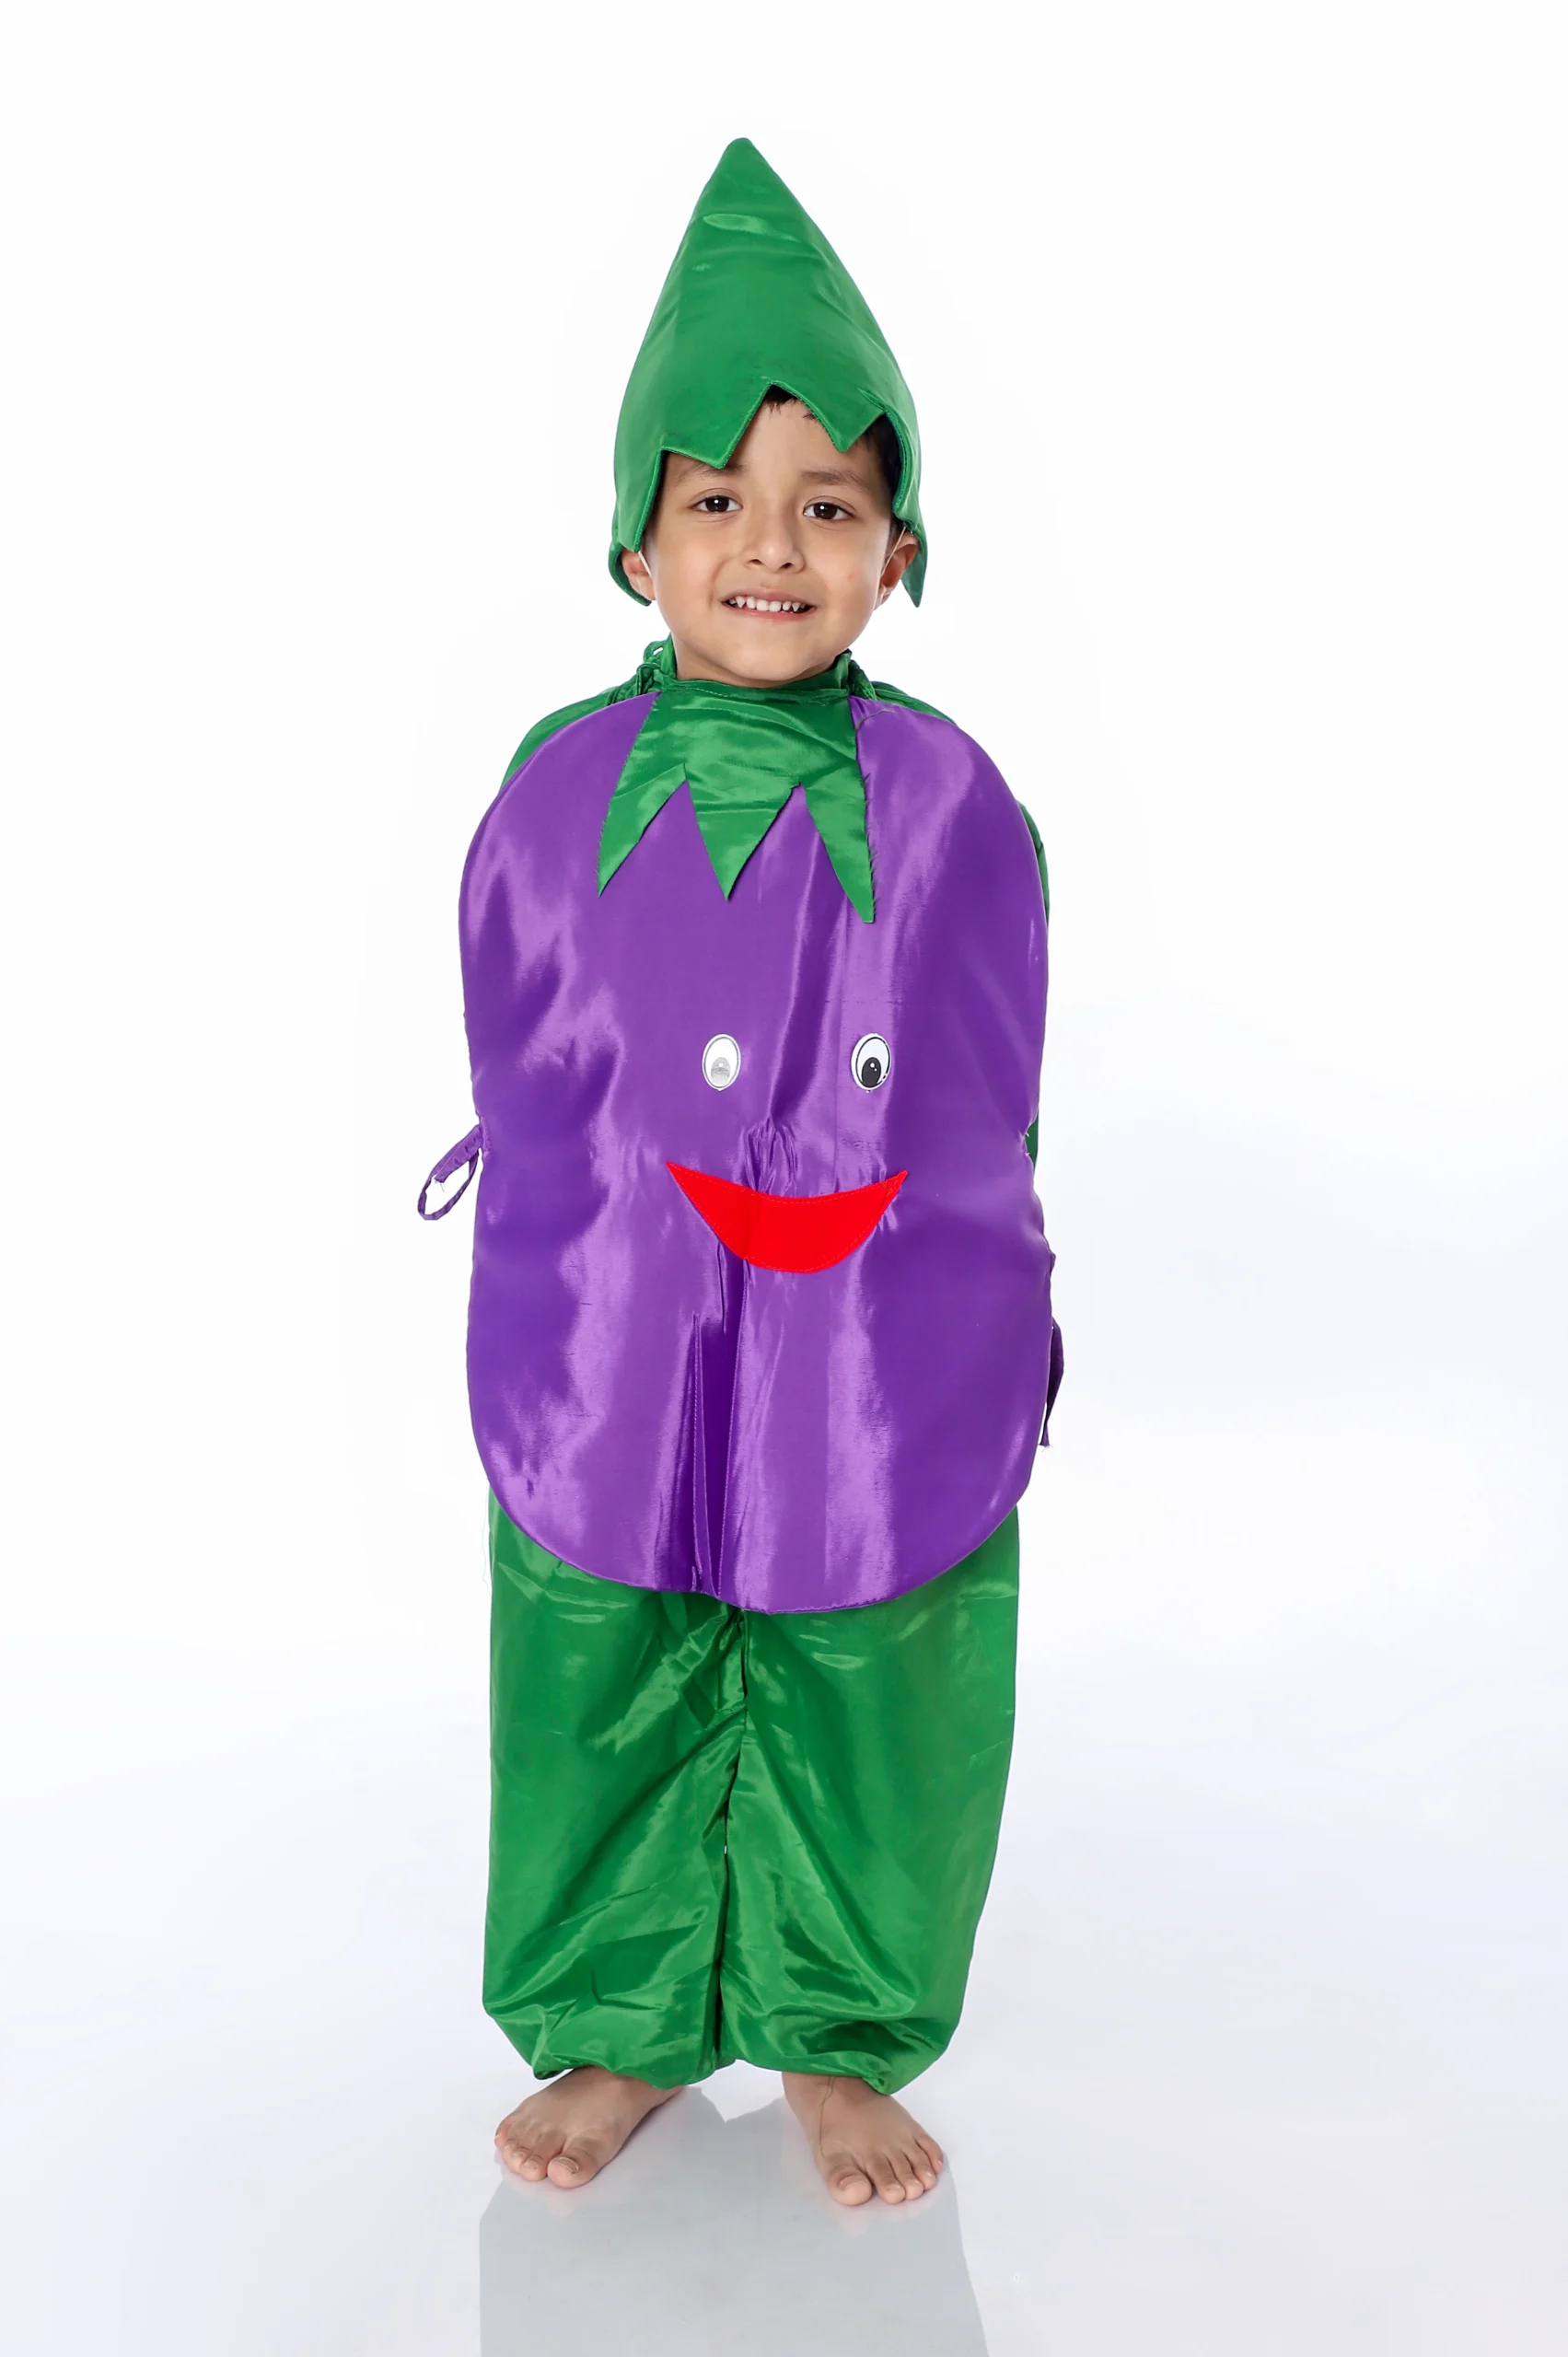 Carrot Costume Costume For Food & Drink Theme Fancy Dress Up Outfits - Kids  - costume carrot kids child novelty funny unisex vegetable food drink on  OnBuy